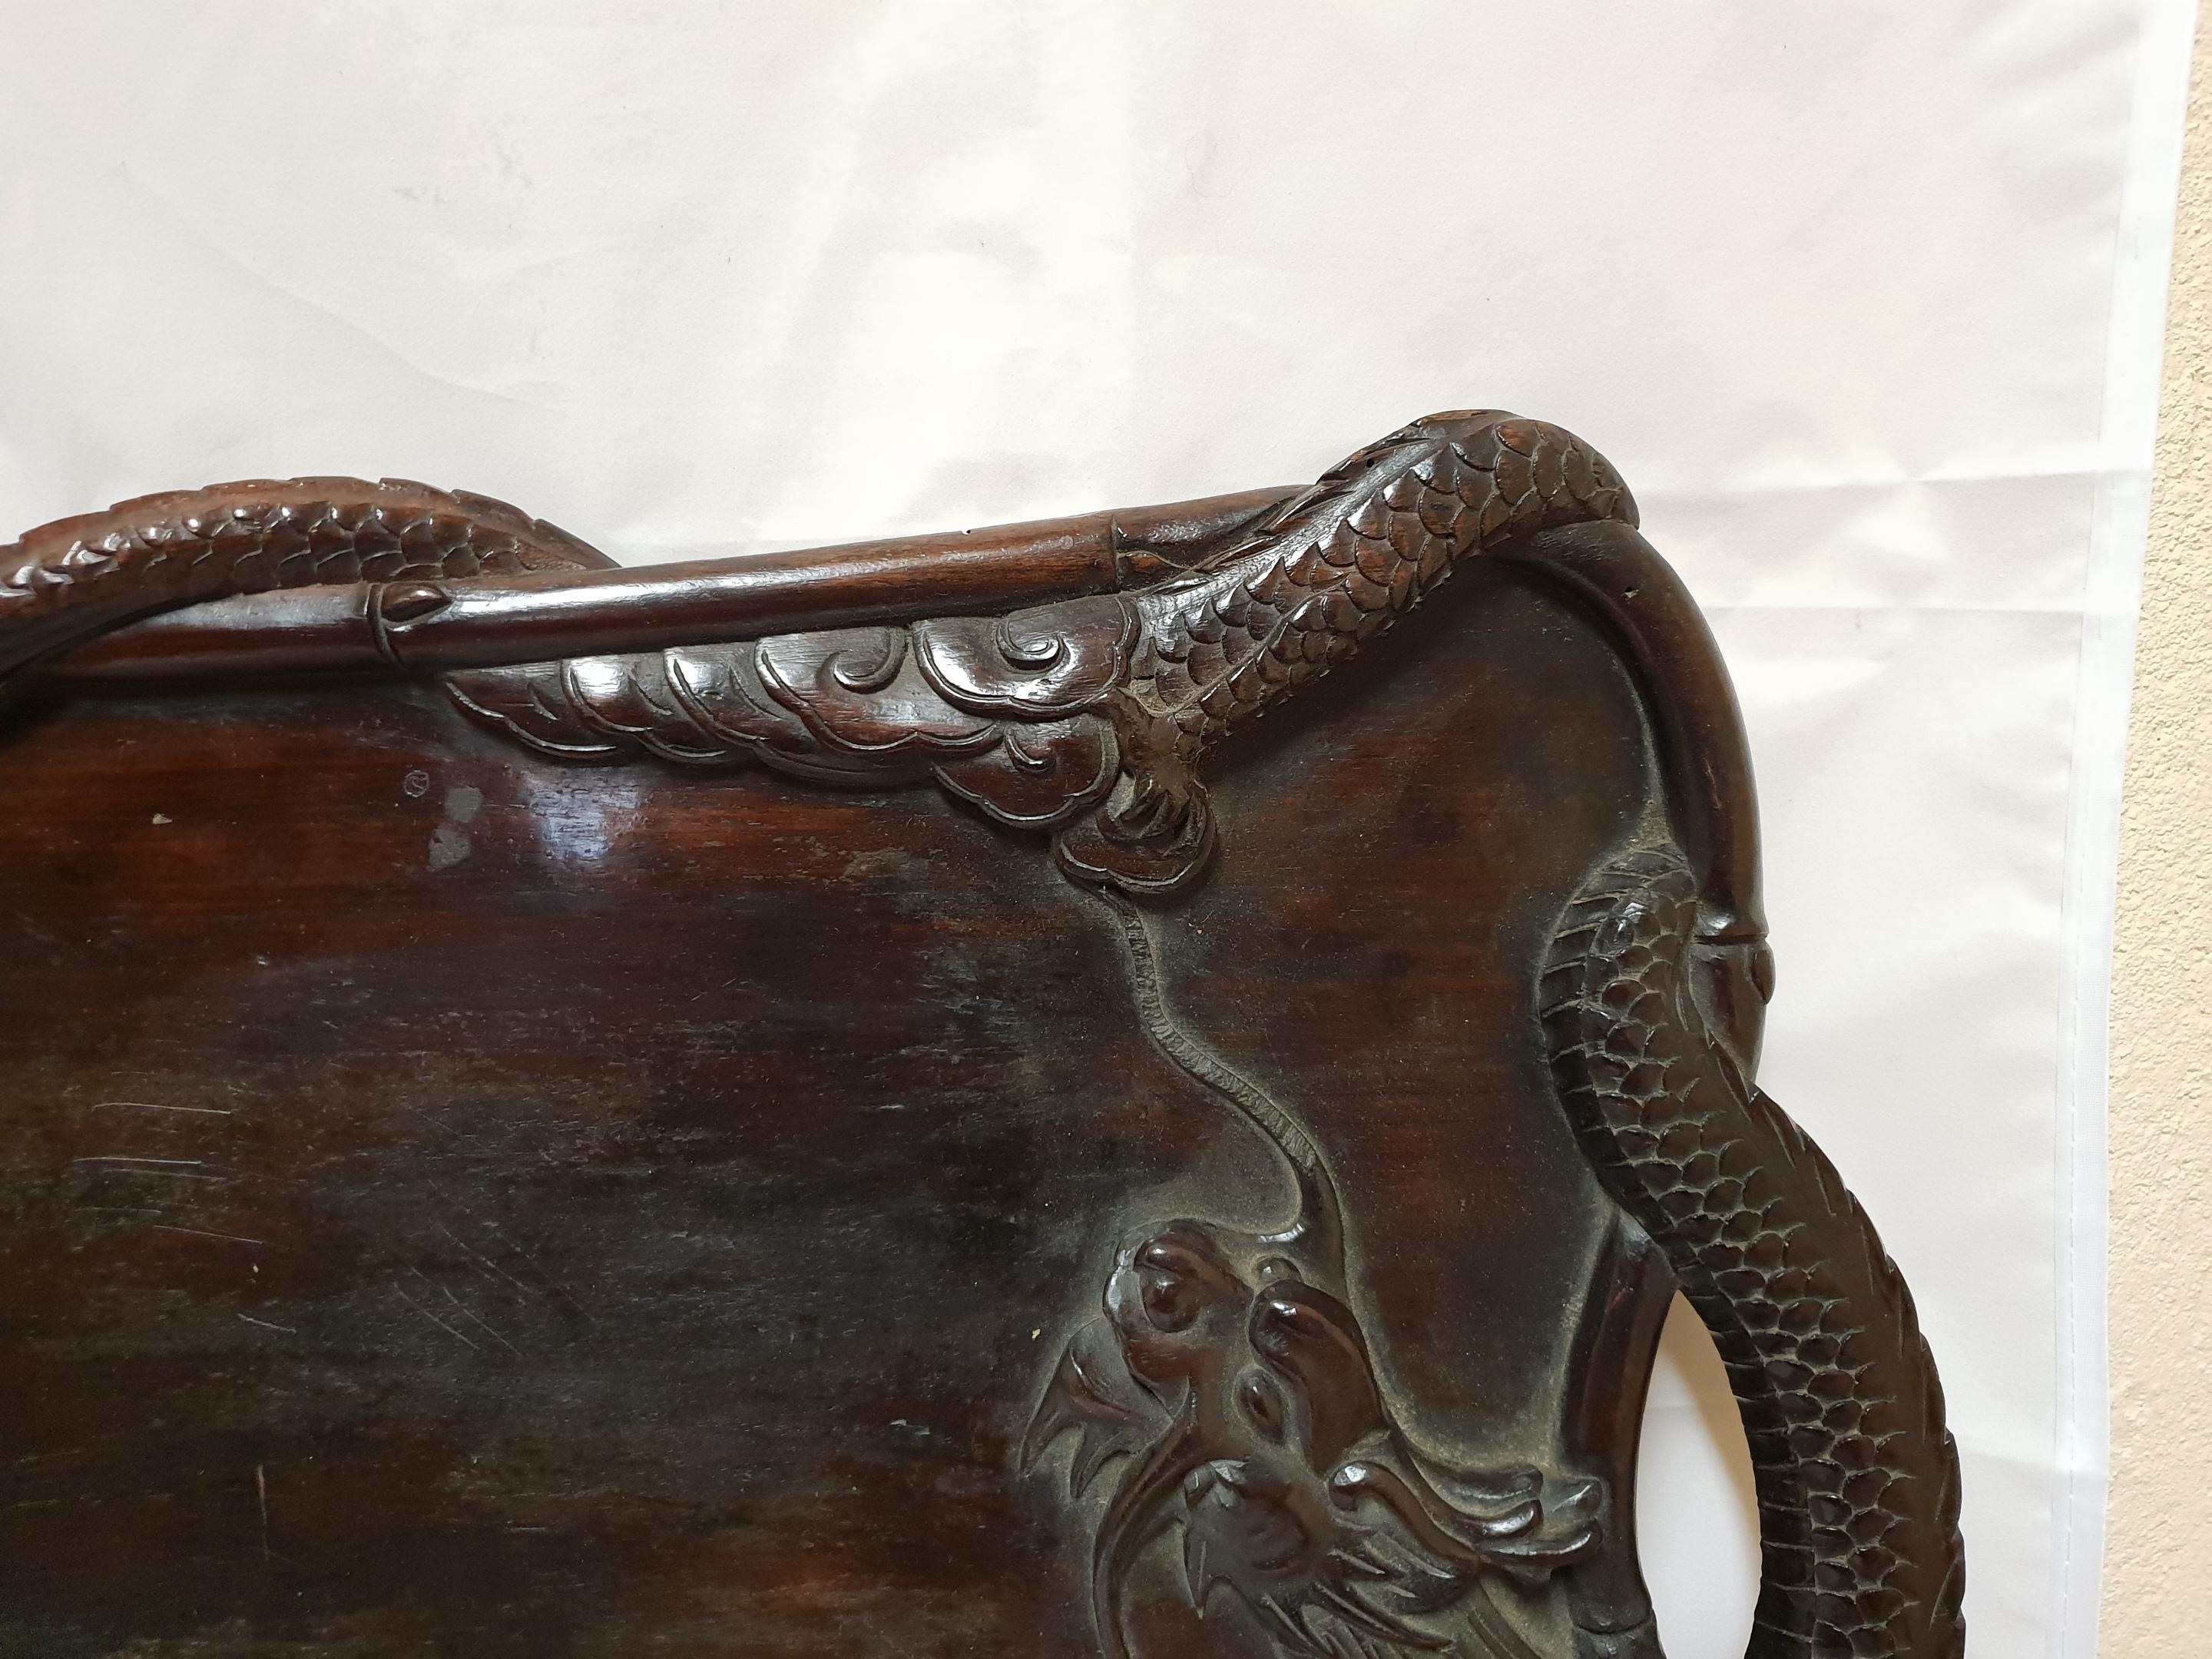 Qing Dynasty Chinese Hardwood Tray with Dragons, 1900s (Frühes 20. Jahrhundert)